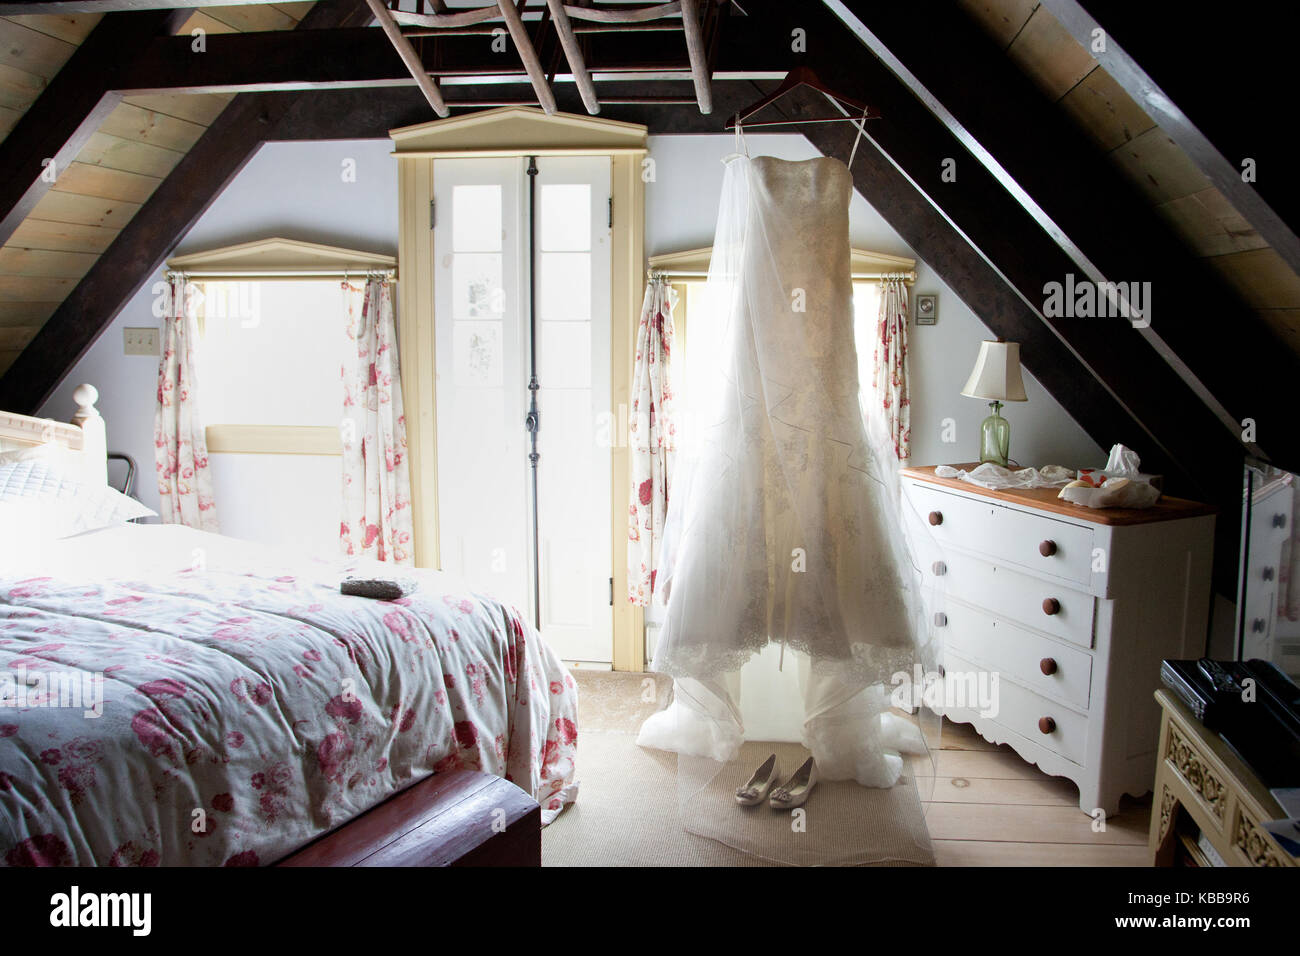 a white wedding gown hanging on a wooden beam ceiling in a rustic cabin Stock Photo